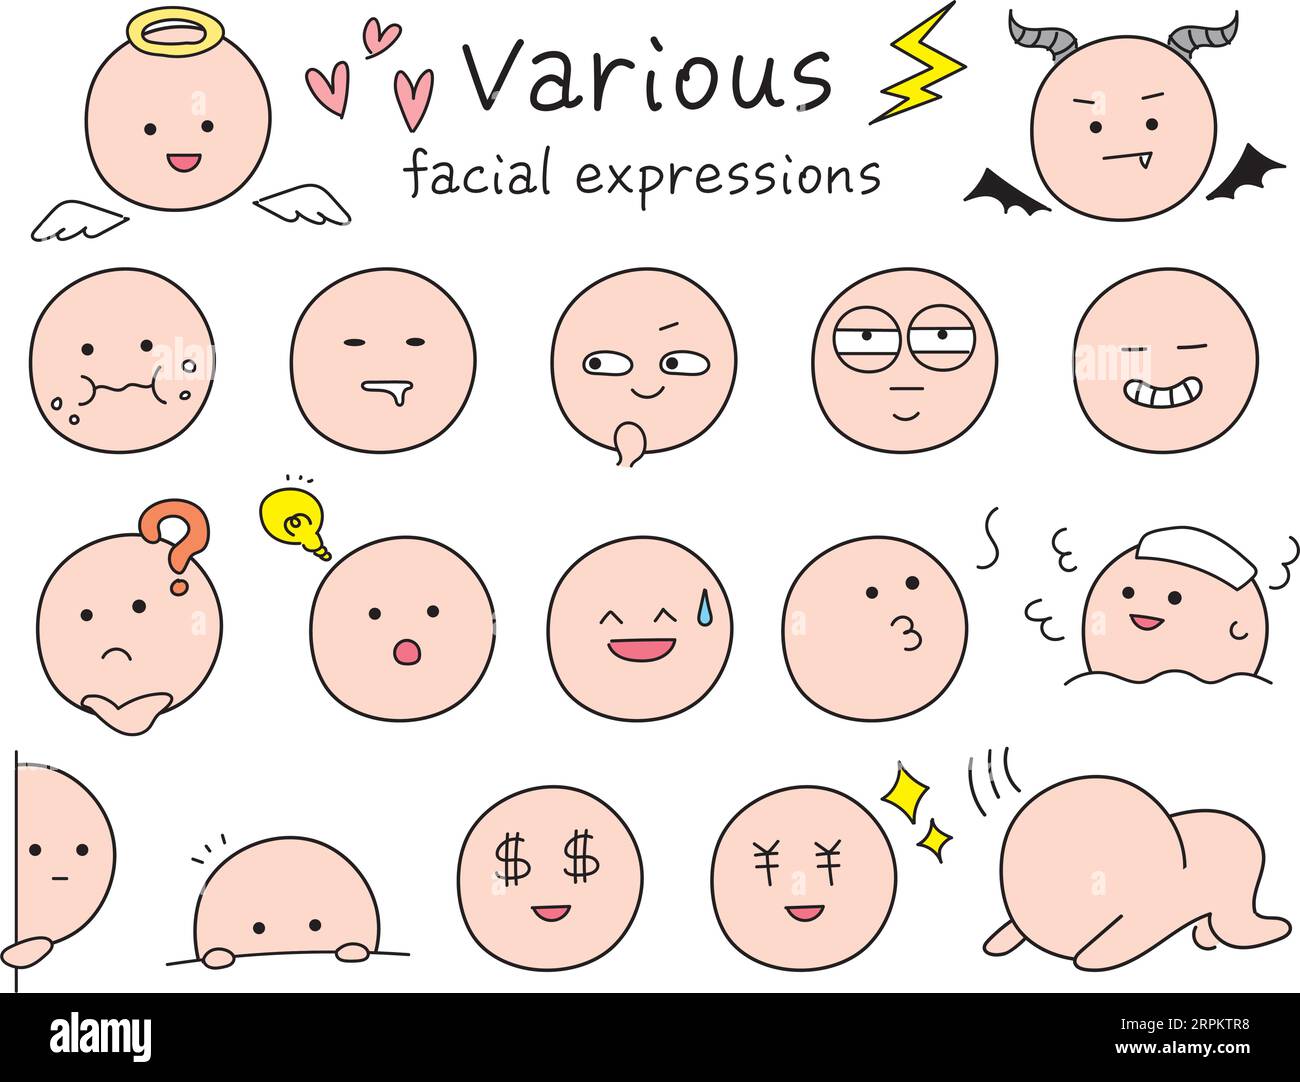 Simple and cute icons with various facial expressions.  Color pictogram style illustration.  Collection of funny emojis. Stock Vector